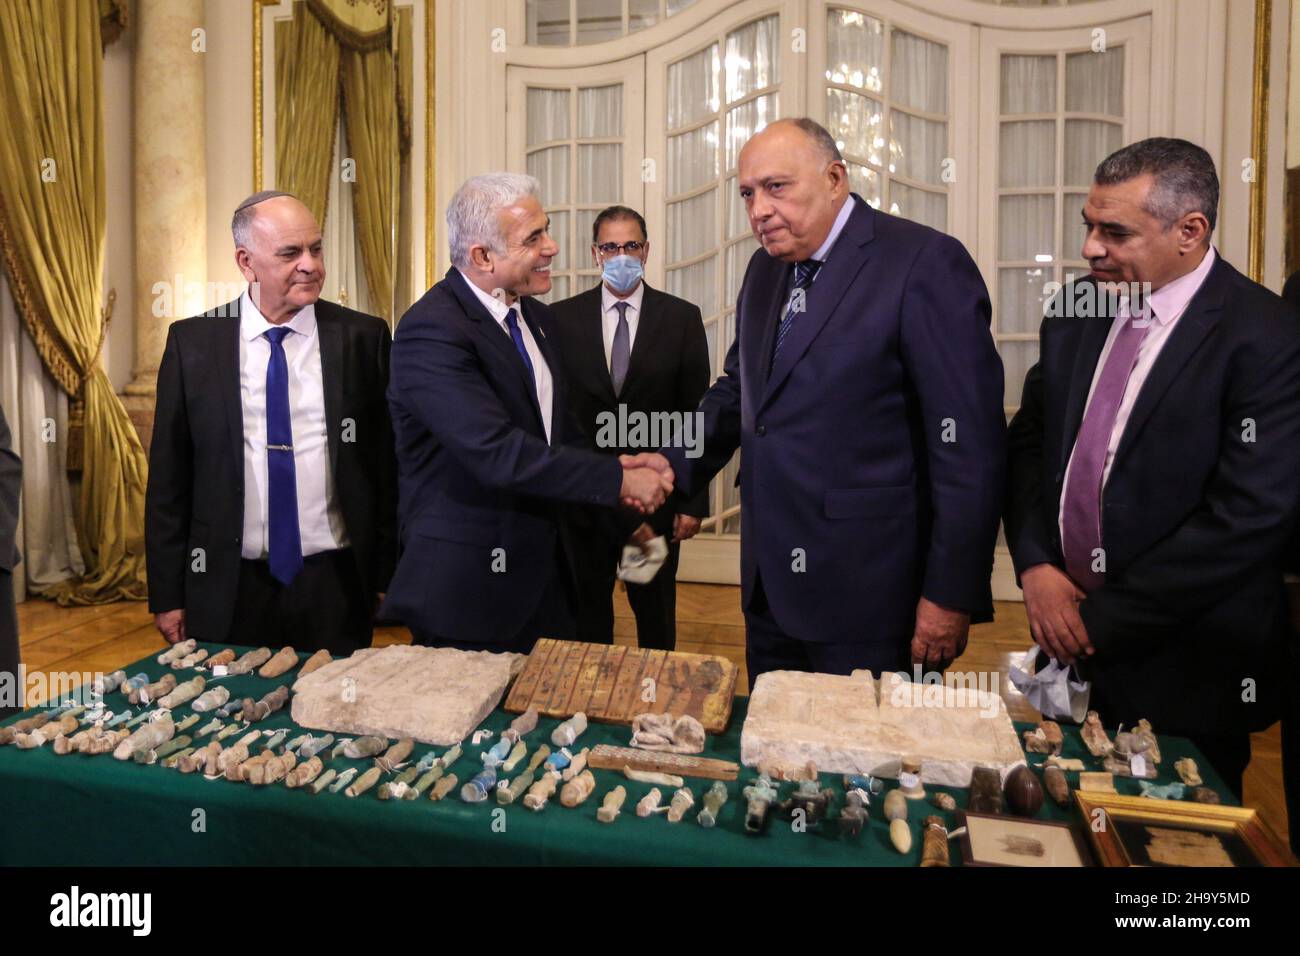 Cairo, Egypt. 09th Dec, 2021. Egyptian Foreign Minister Sameh Shoukry shakes hands with Israeli Foreign Minister Yair Lapid, during the handover of dozens of stolen Egyptian artifacts that were smuggled to Israel and were held by the Israel Antiquities Authority. Credit: Hassan Mohamed/dpa/Alamy Live News Stock Photo